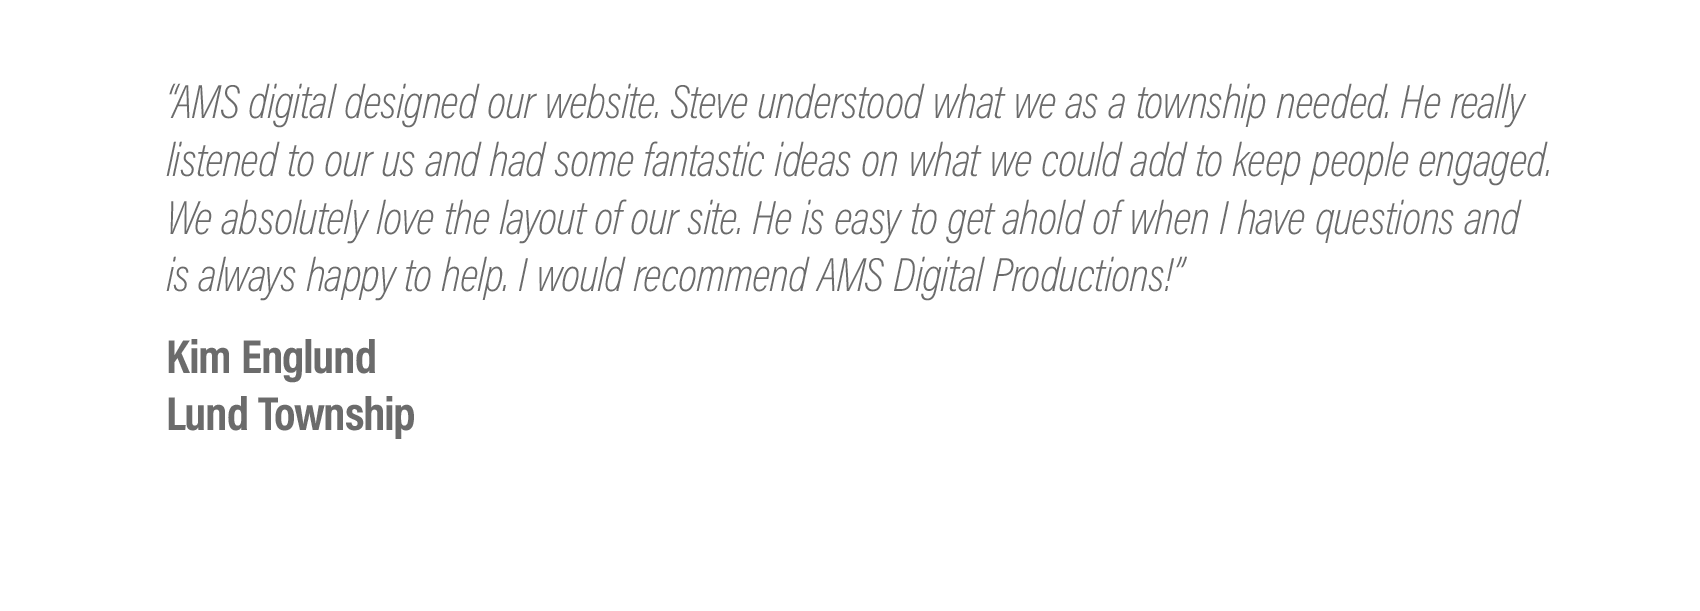  “AMS digital designed our website. Steve understood what we as a township needed. He really listened to our us and had some fantastic ideas on what we could add to keep people engaged. We absolutely love the layout of our site. He is easy to get aho